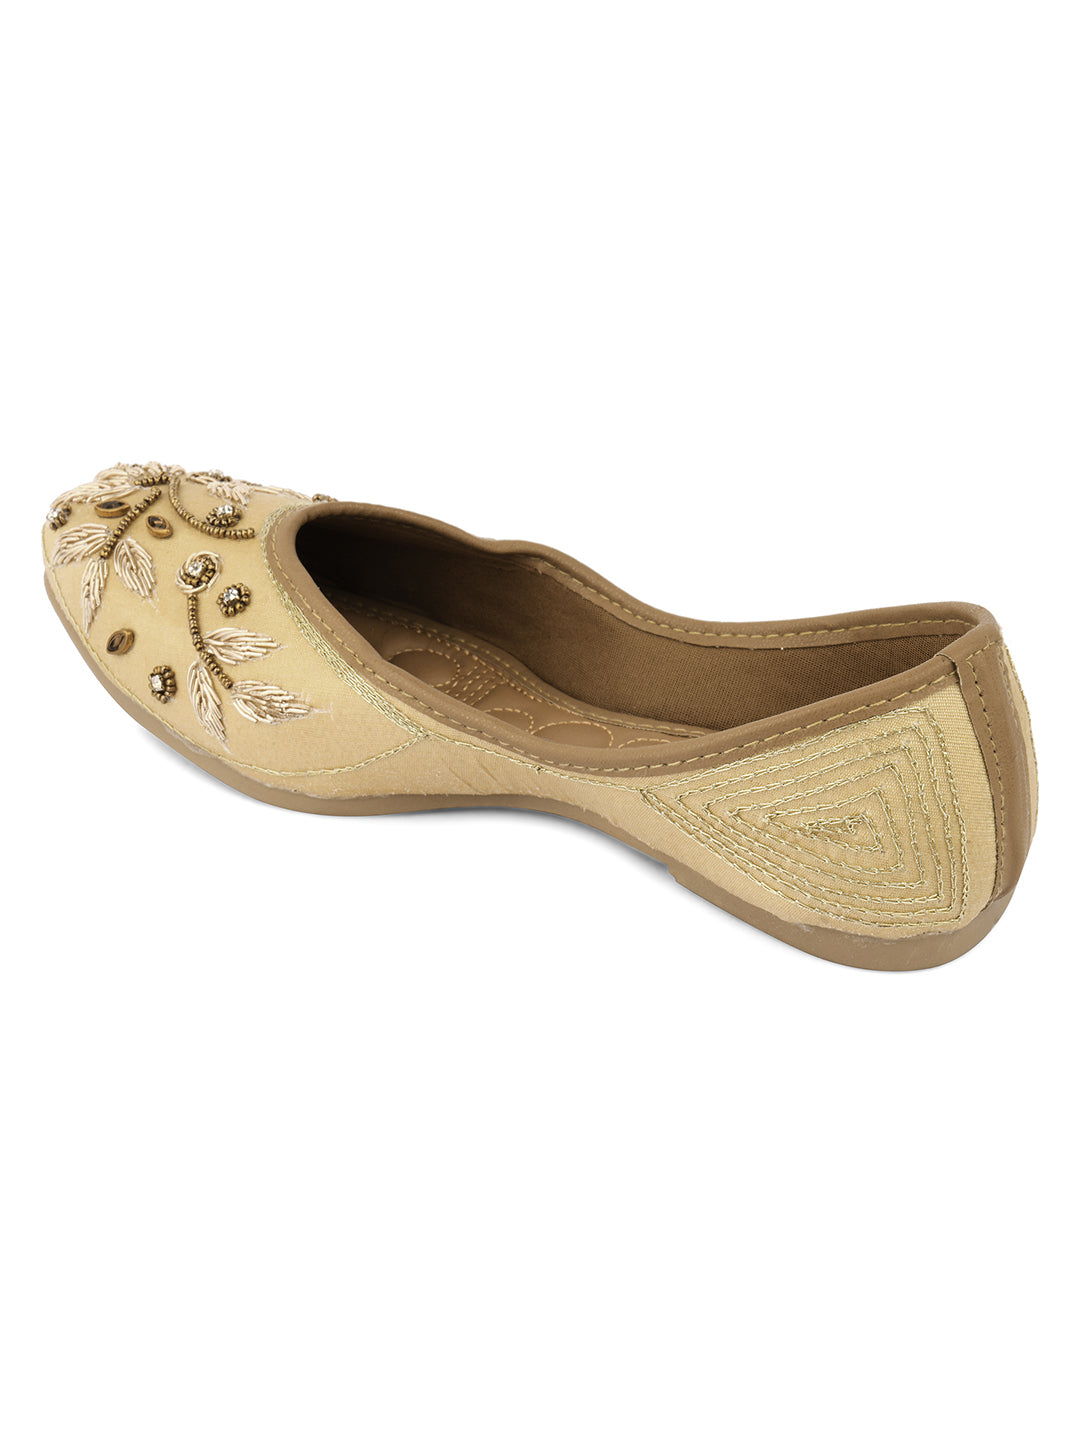 DESI COLOUR Women Multicoloured Embellished Leather Ethnic Mojaris with Laser Cuts Flats